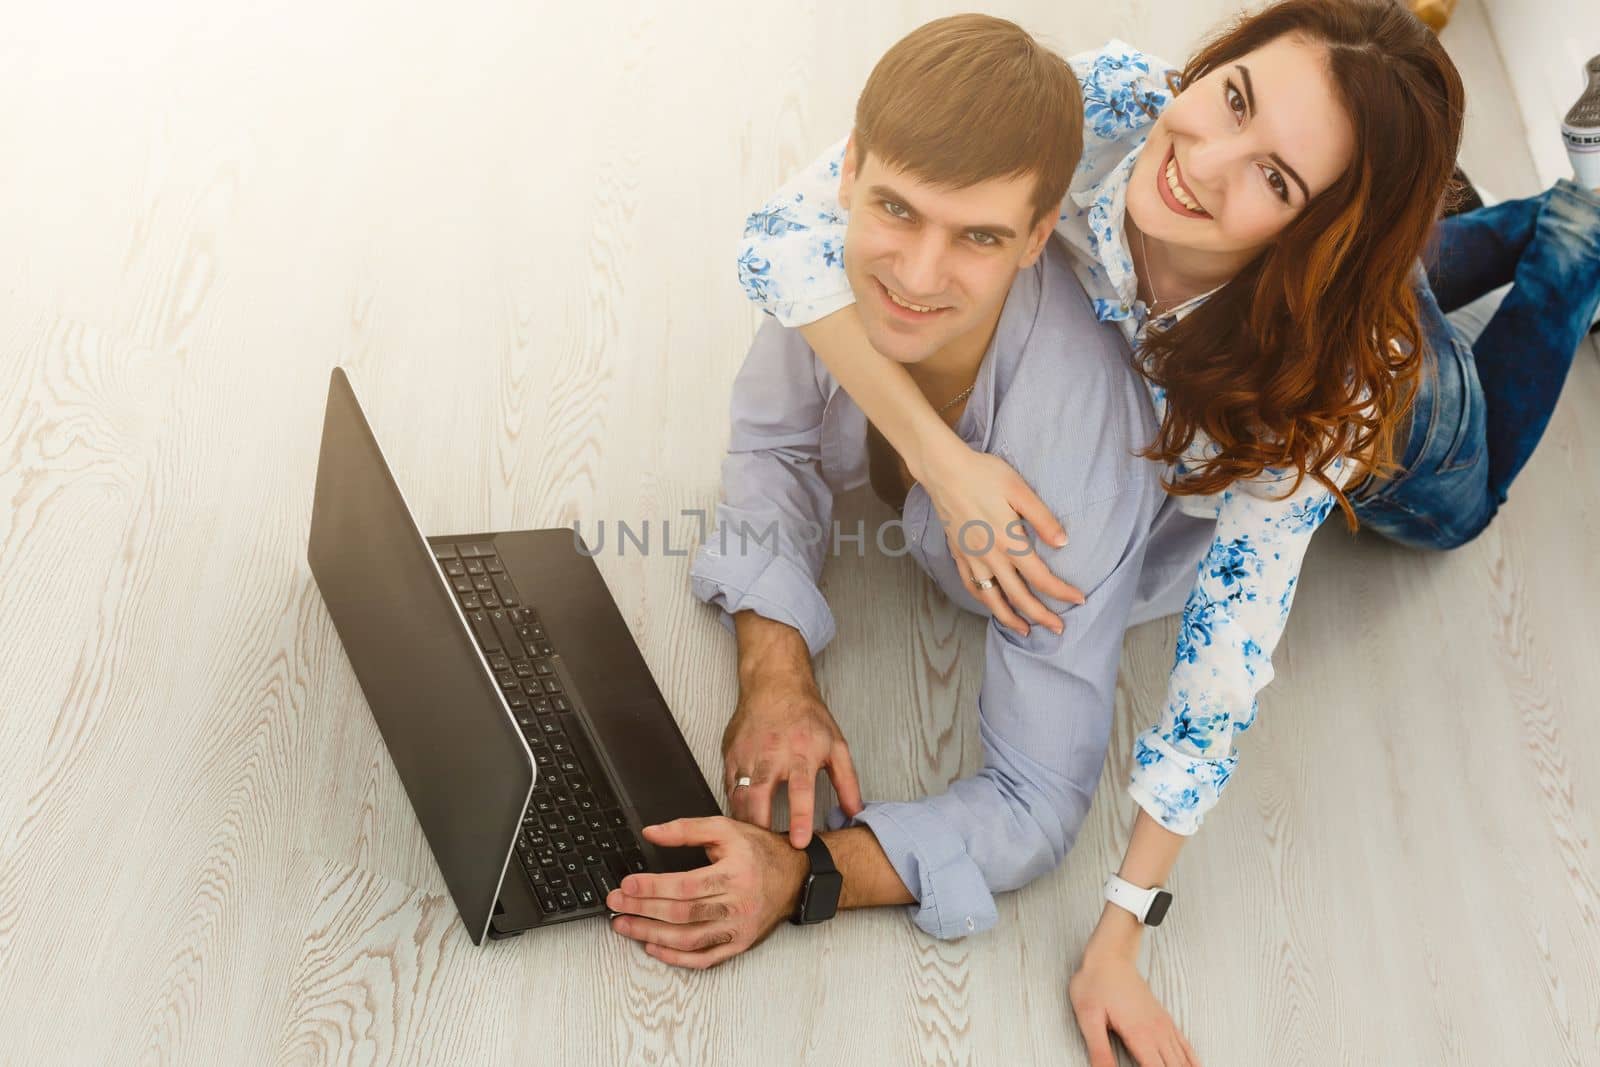 Couple buying online together with a laptop on a desktop at home